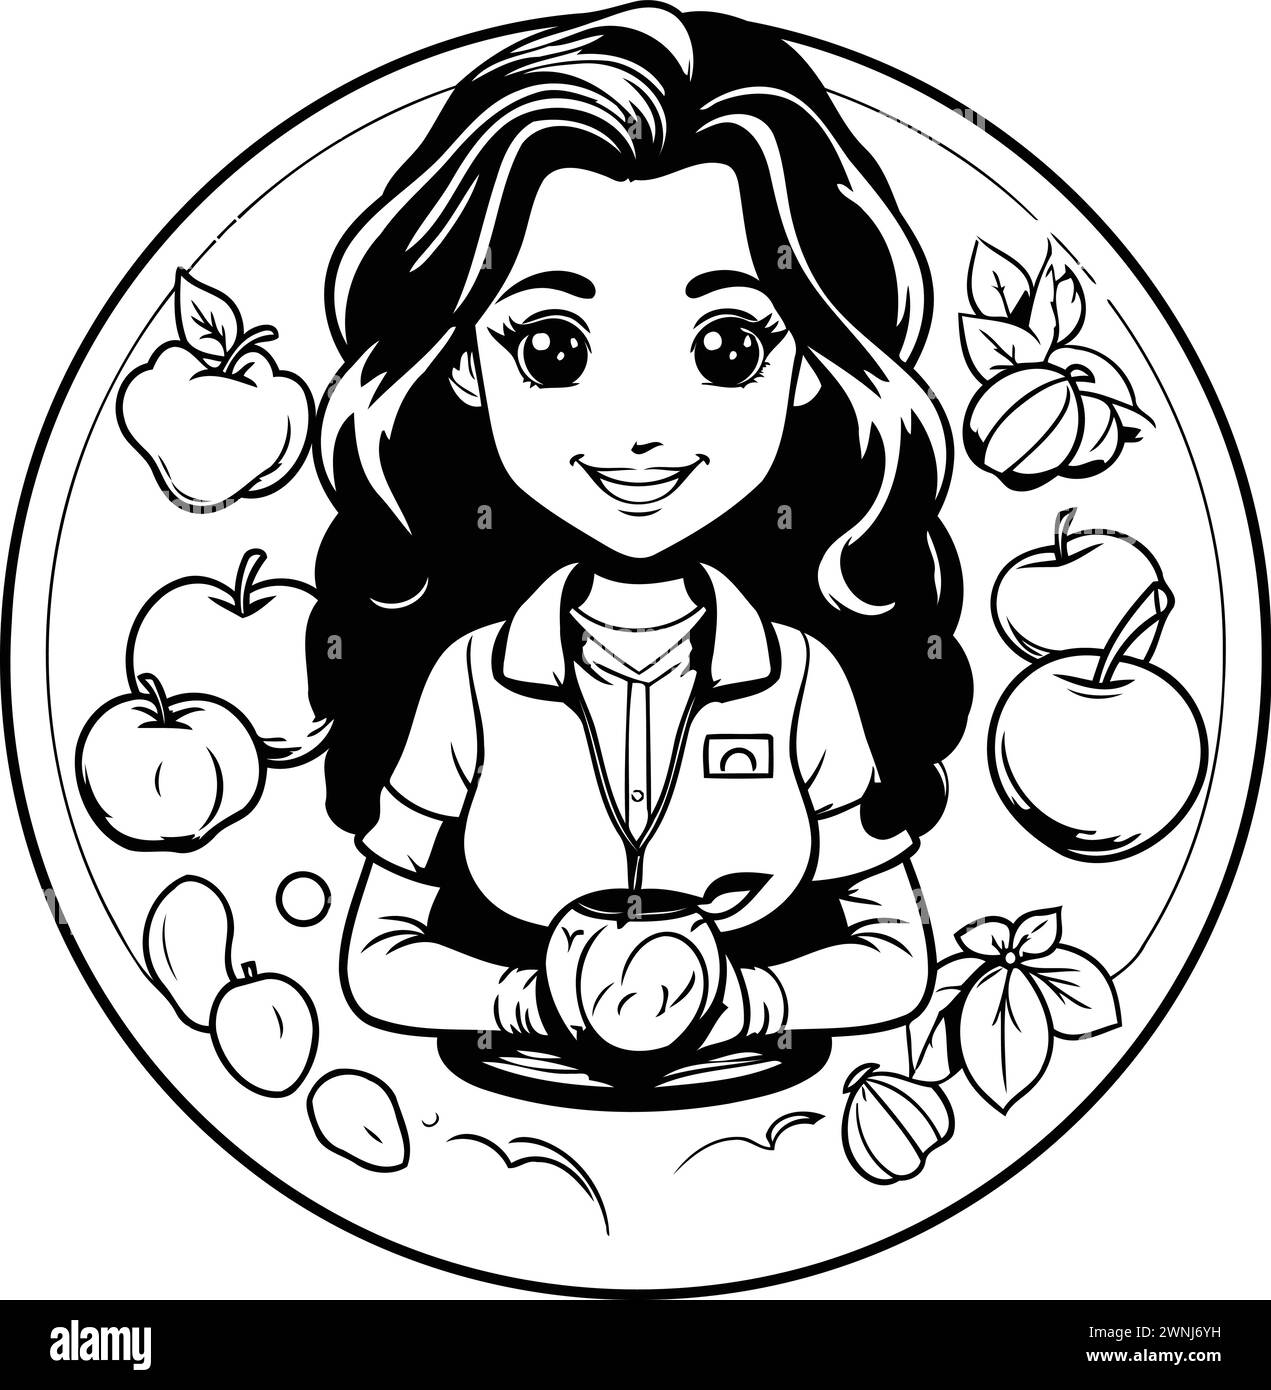 Cute cartoon girl with apples. Vector illustration. Coloring book for children. Stock Vector